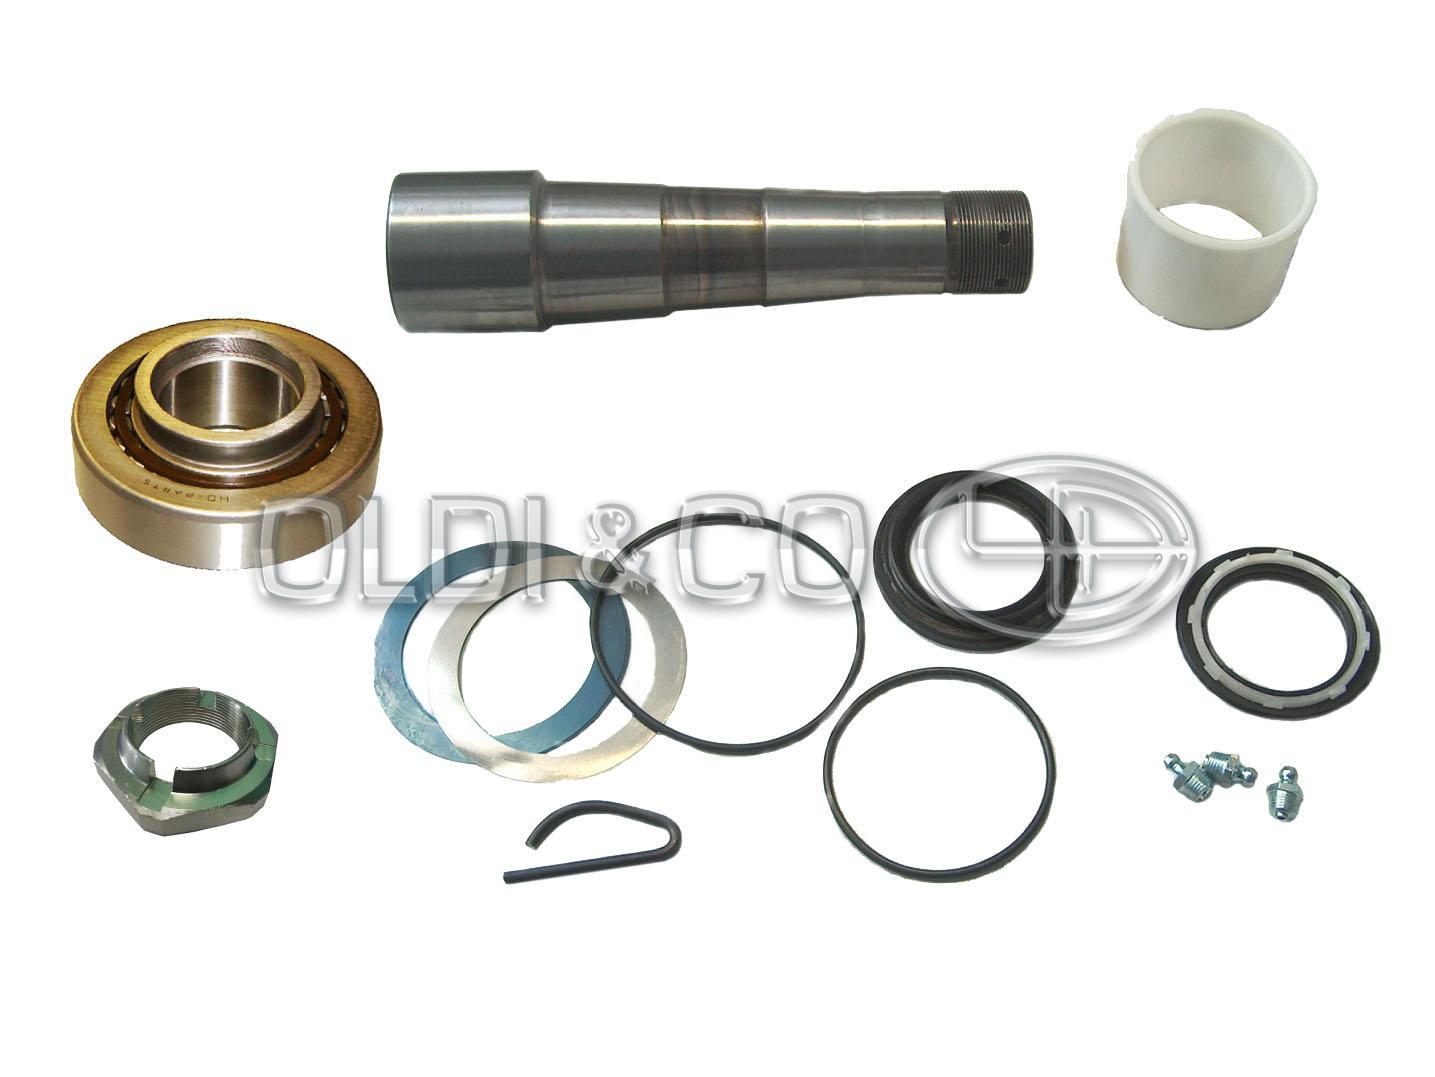 34.074.28287 Suspension parts → King pin - steering knuckle rep. kit